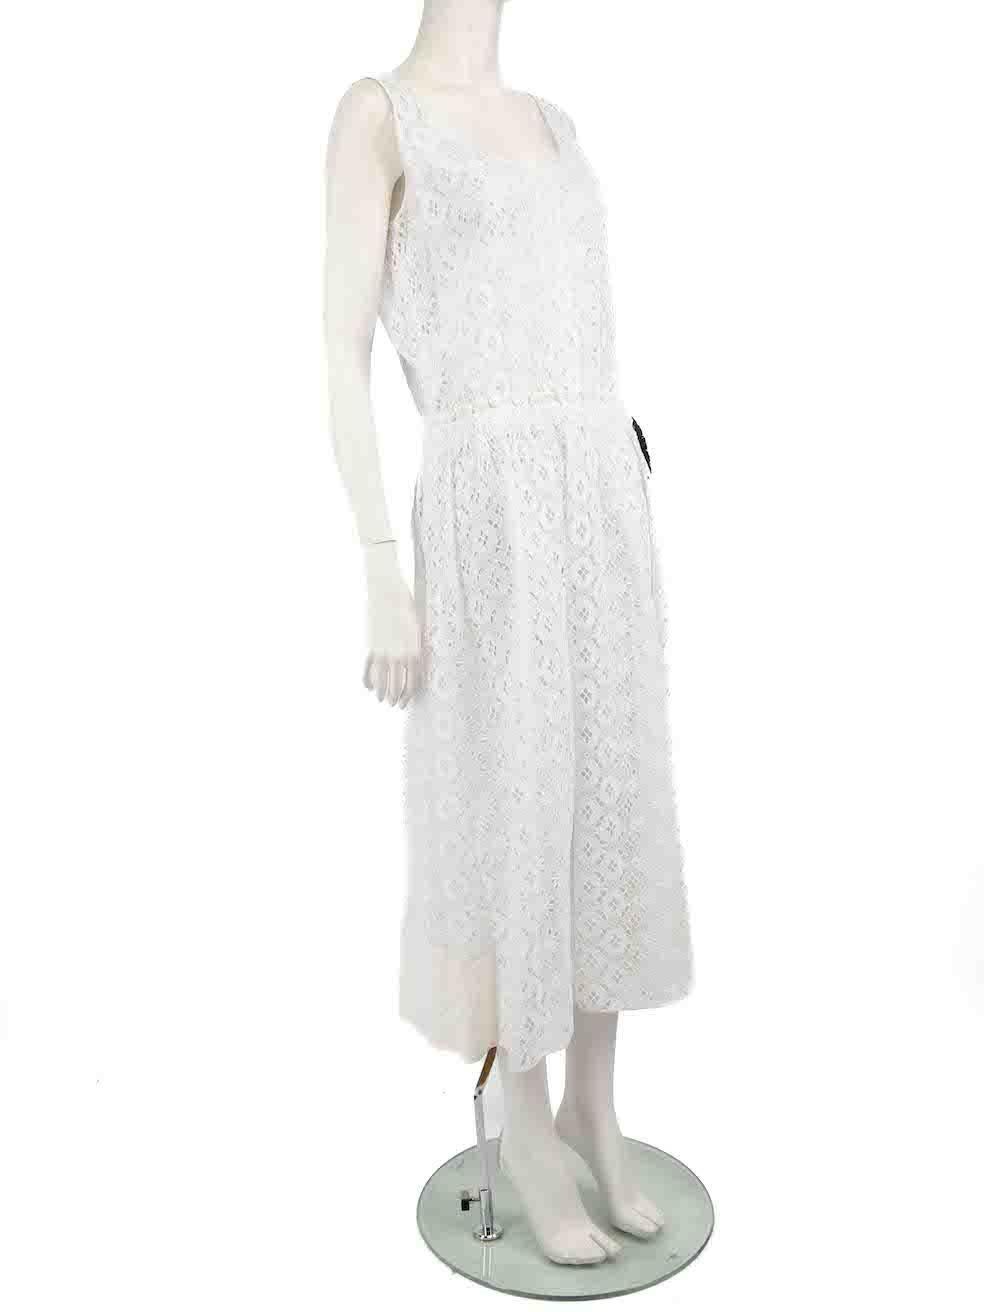 CONDITION is Very good. Minimal wear to dress is evident. Some discolouration to the hem on this used N°21 designer resale item. This item comes with original hanger.
 
 Details
 White
 Lace
 Dress
 See through
 Sleeveless
 Round neck
 Midi
